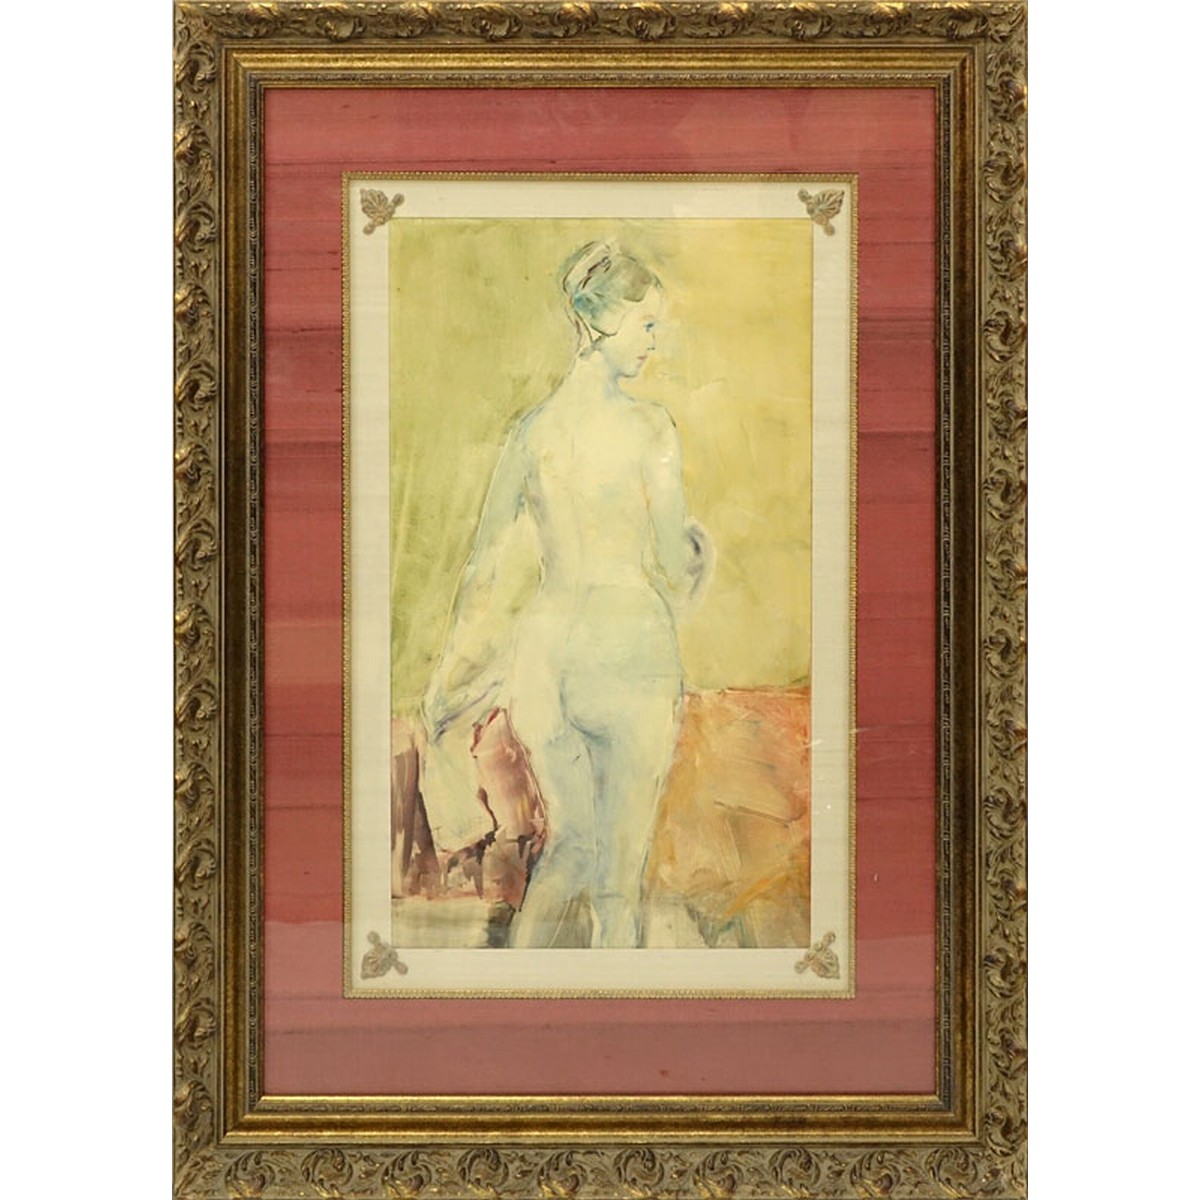 Large Modern Watercolor on Paper, Nude in Interior Scene, Unsigned. Good condition. Measures 24" H - Image 2 of 8